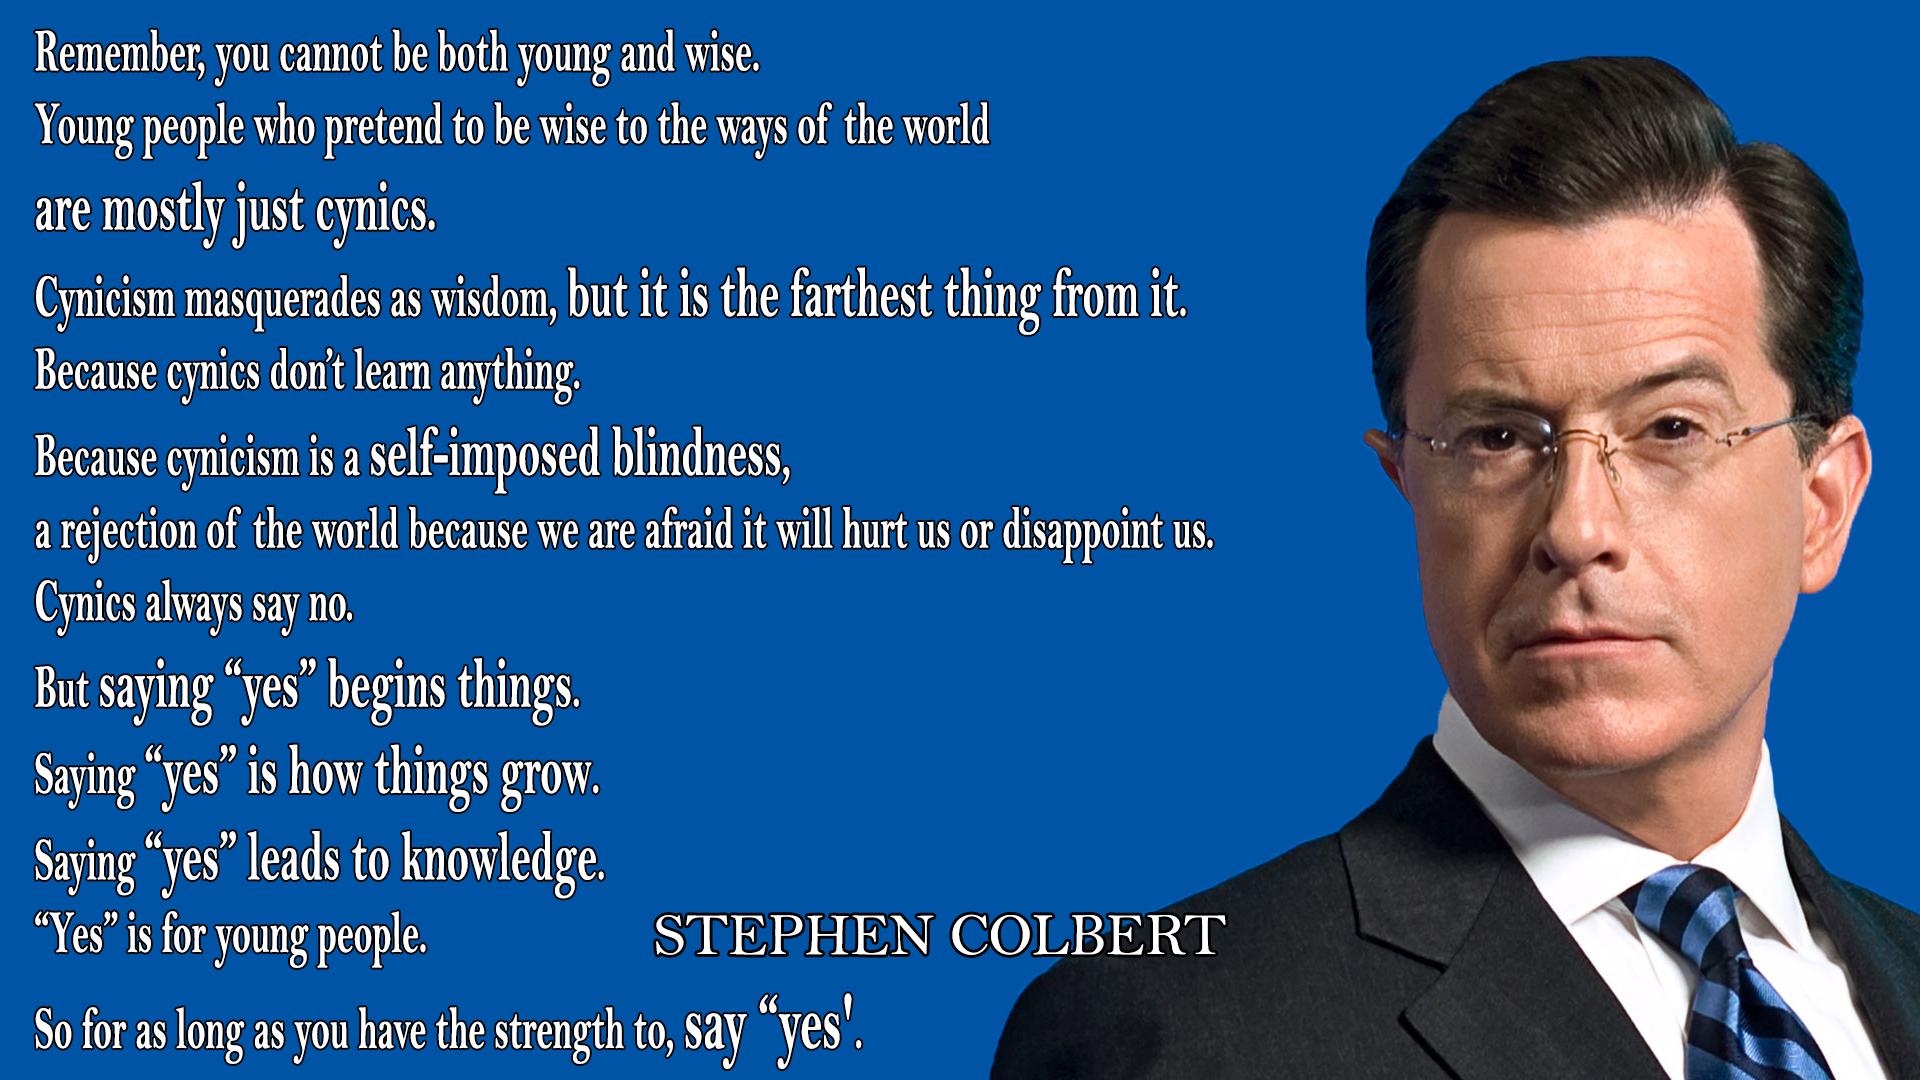 [Image] Kinda Relevant Quote From Stephen Colbert.